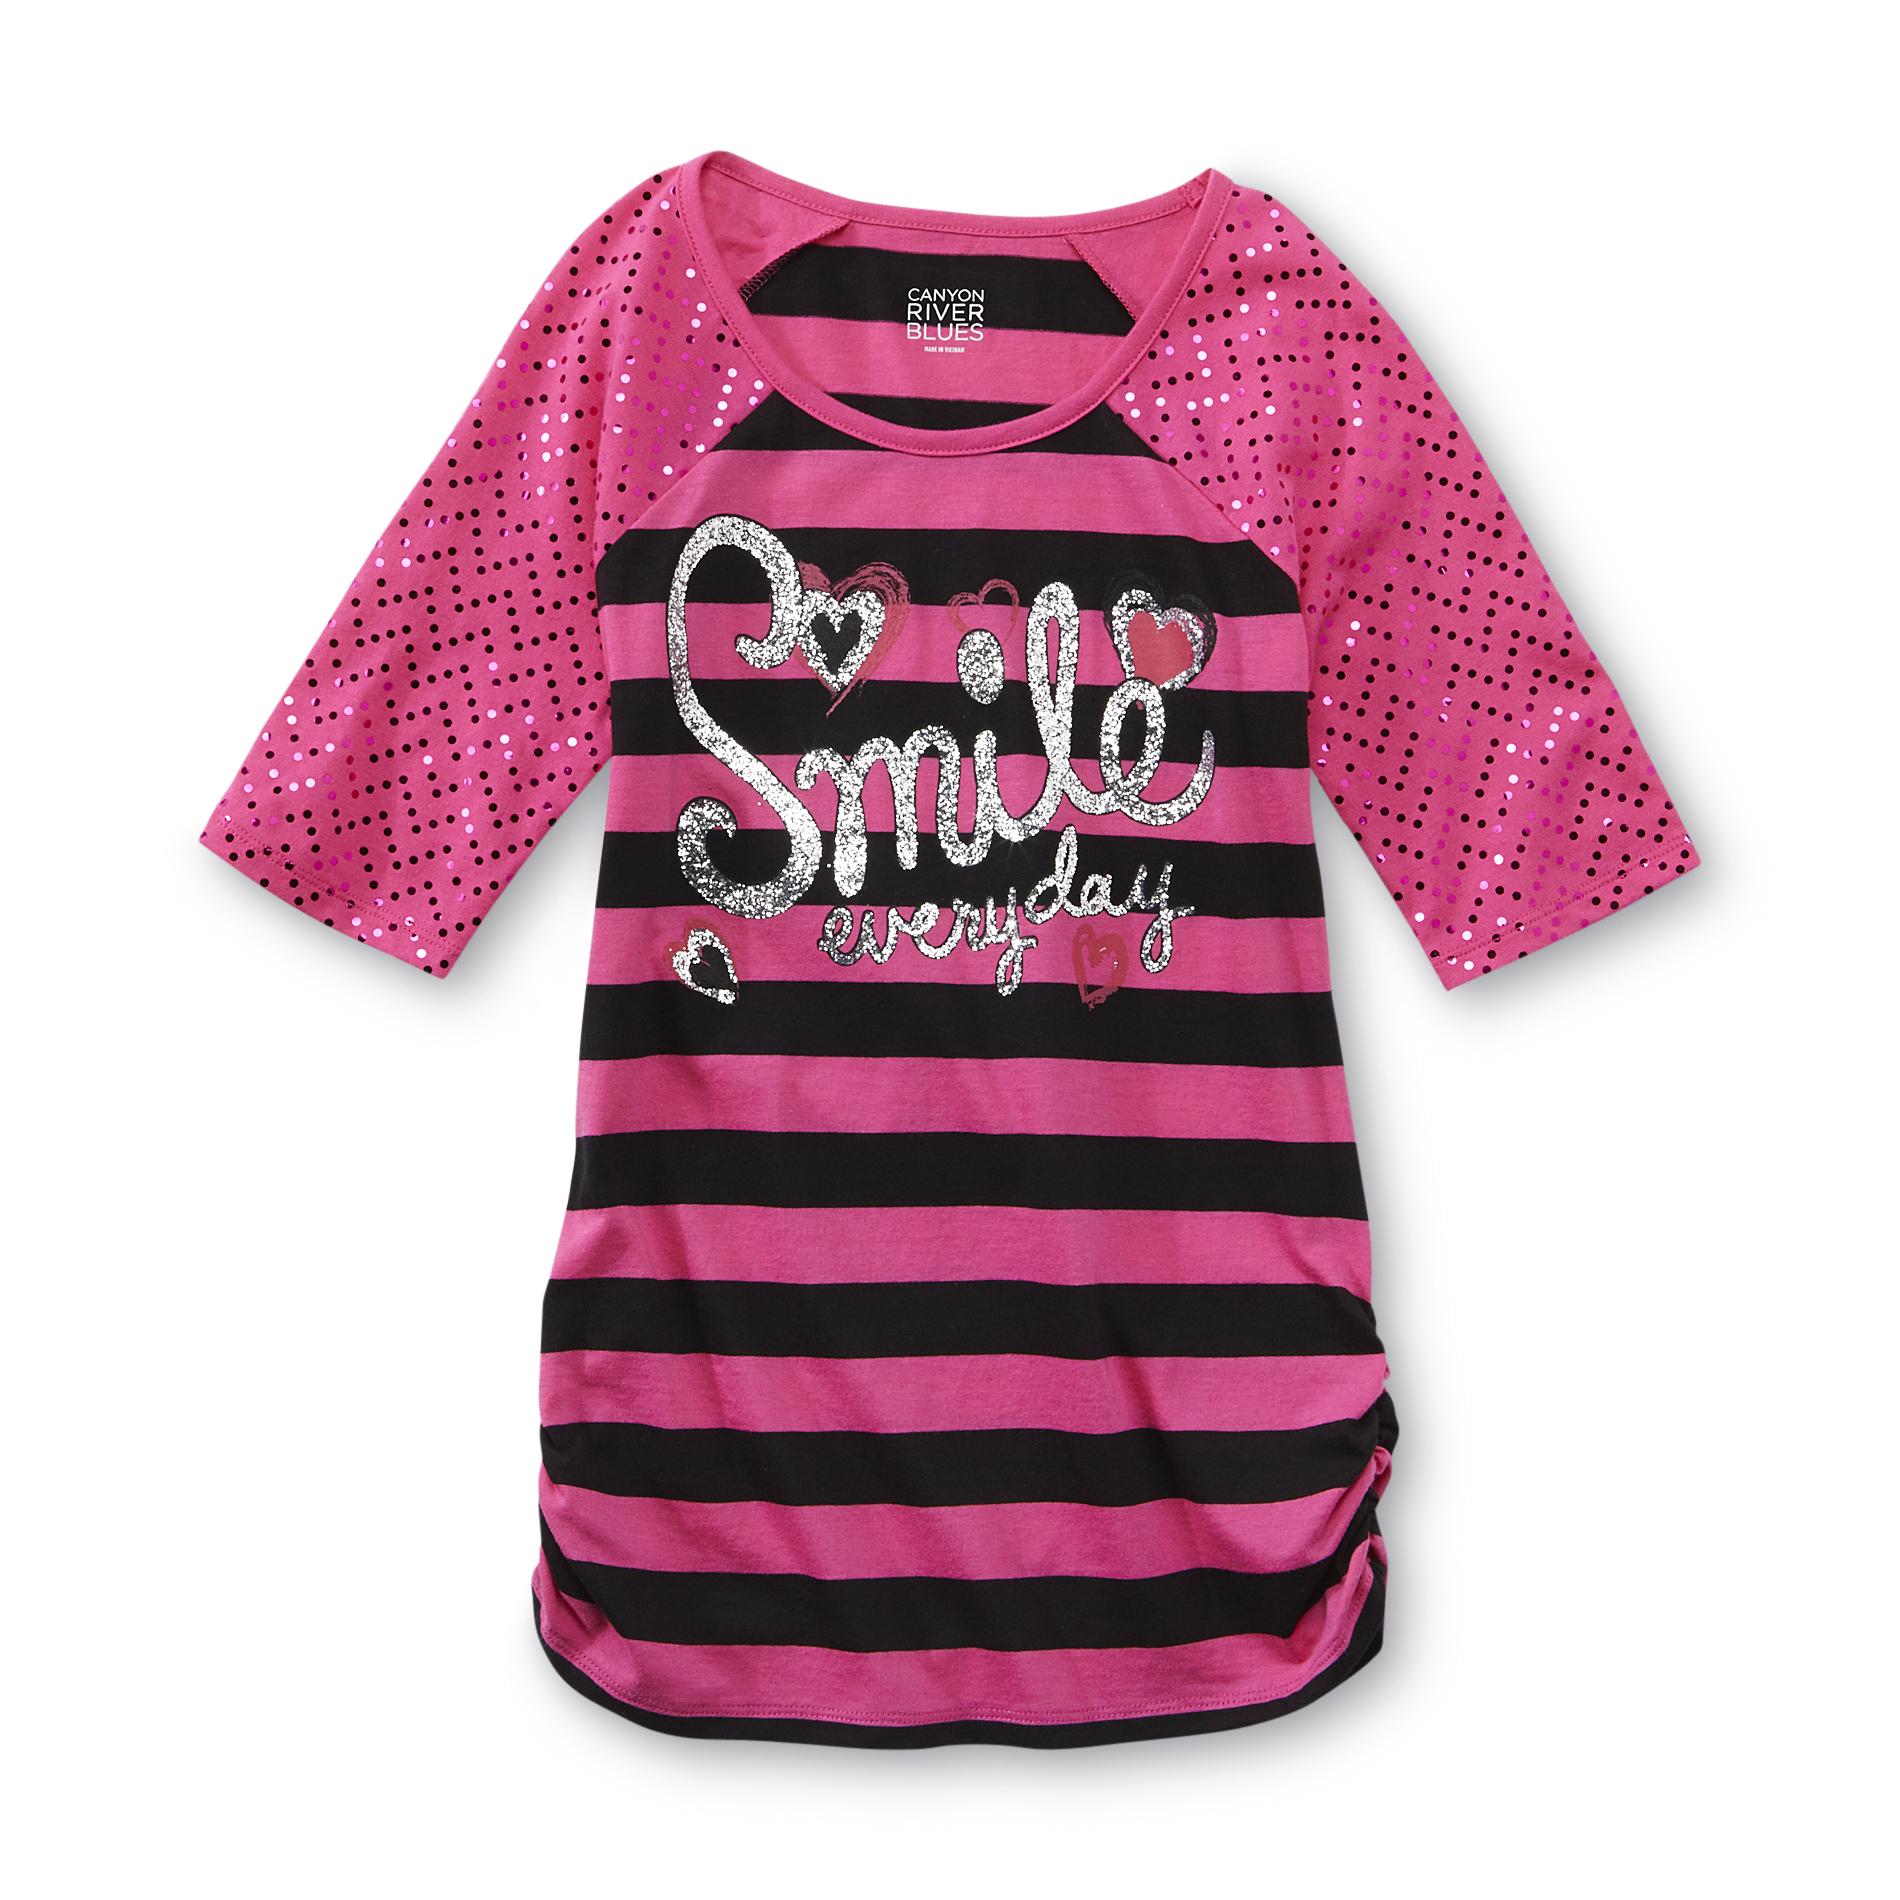 Canyon River Blues Girl's Raglan Sleeve Sequined Top - Smile